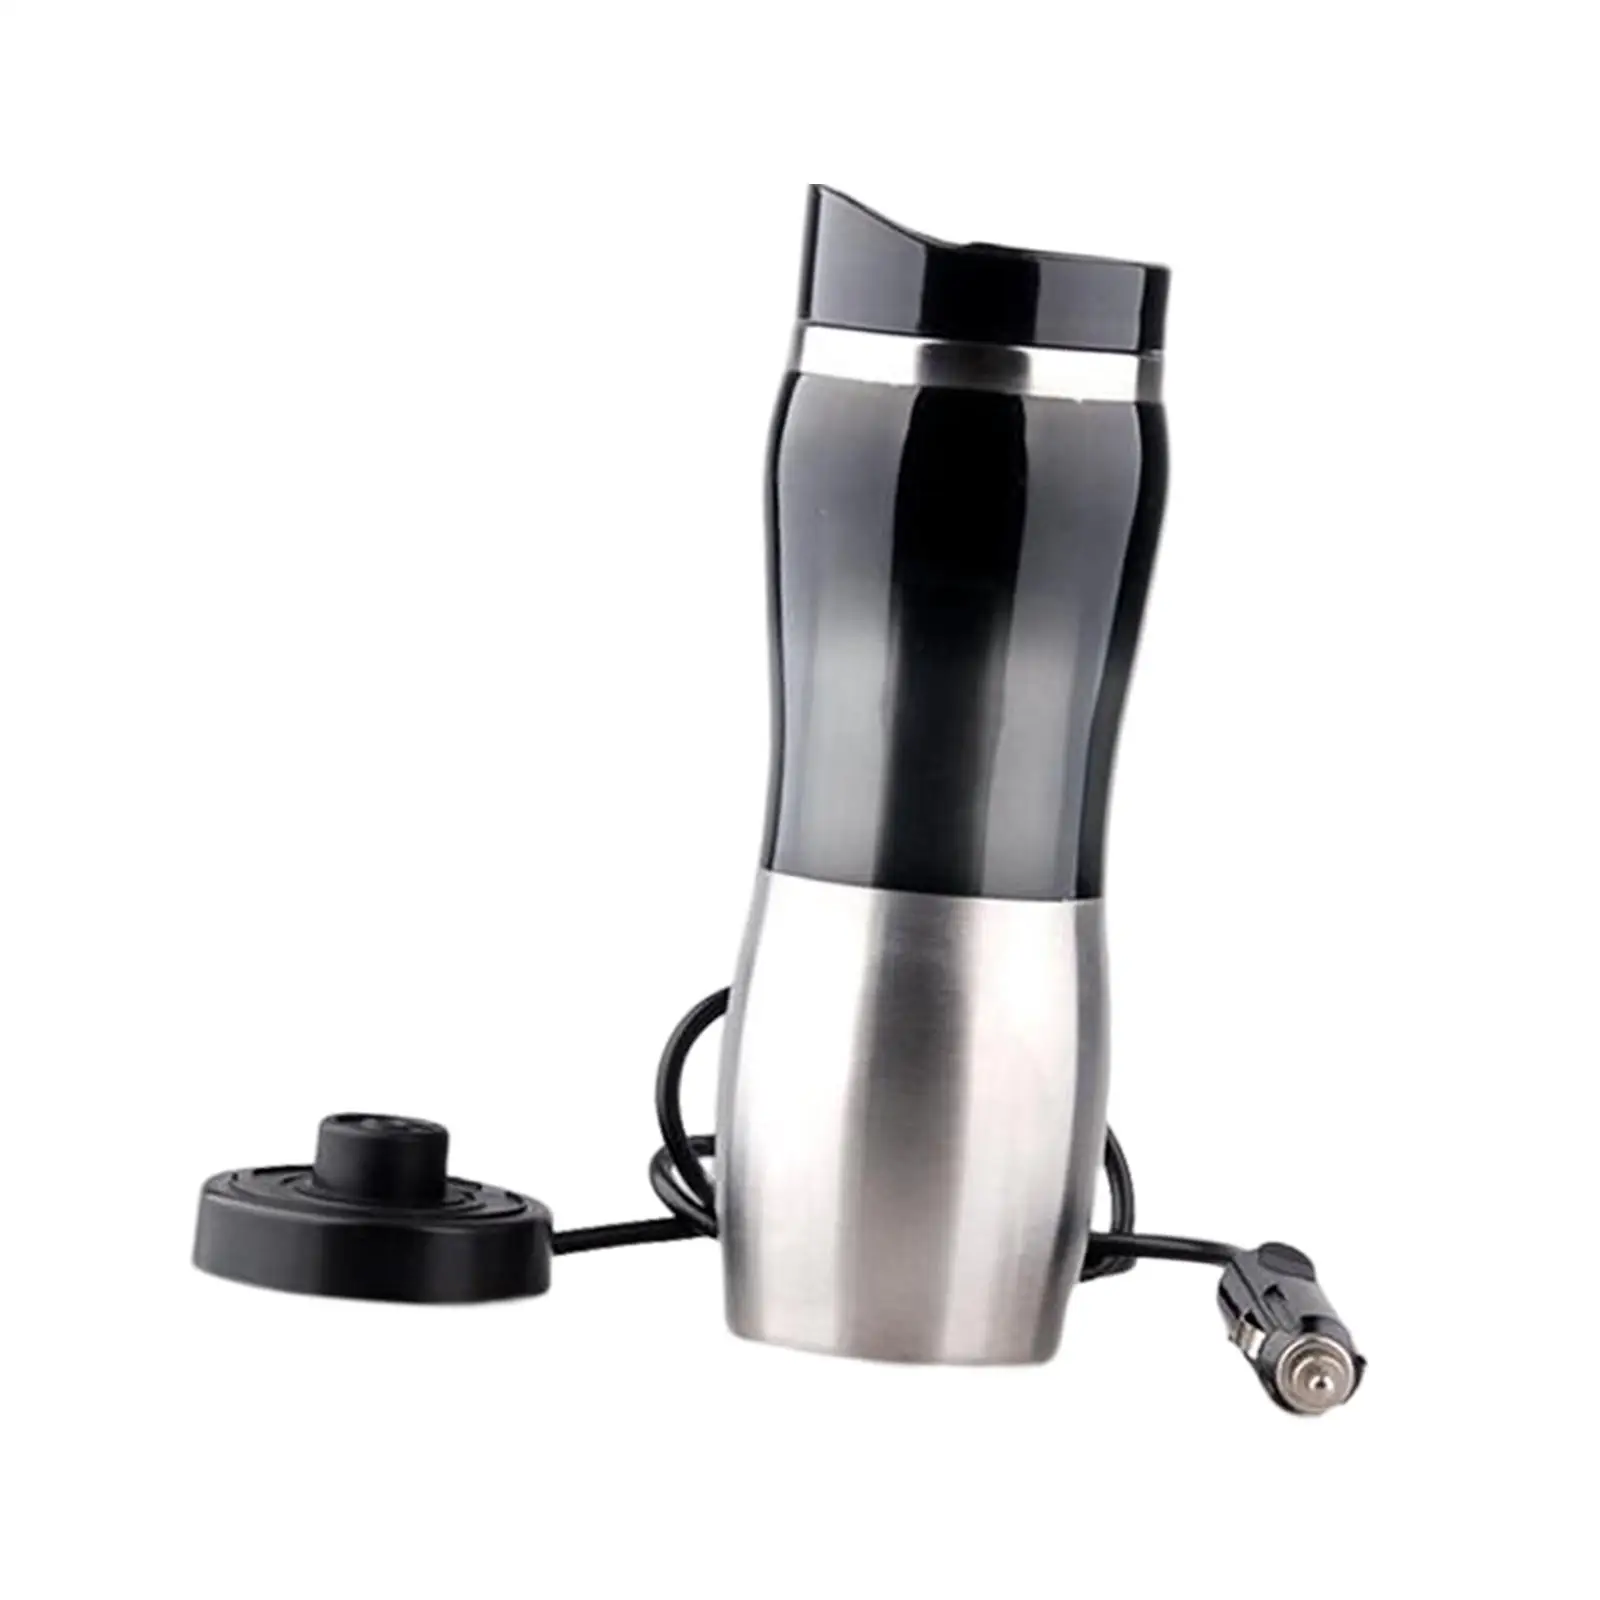  Kettle /12V/ 400ml/  Stainless Steel/ Mug/ Travel /Heating Cup/ Car  for Tea  Eggs Camping Boat